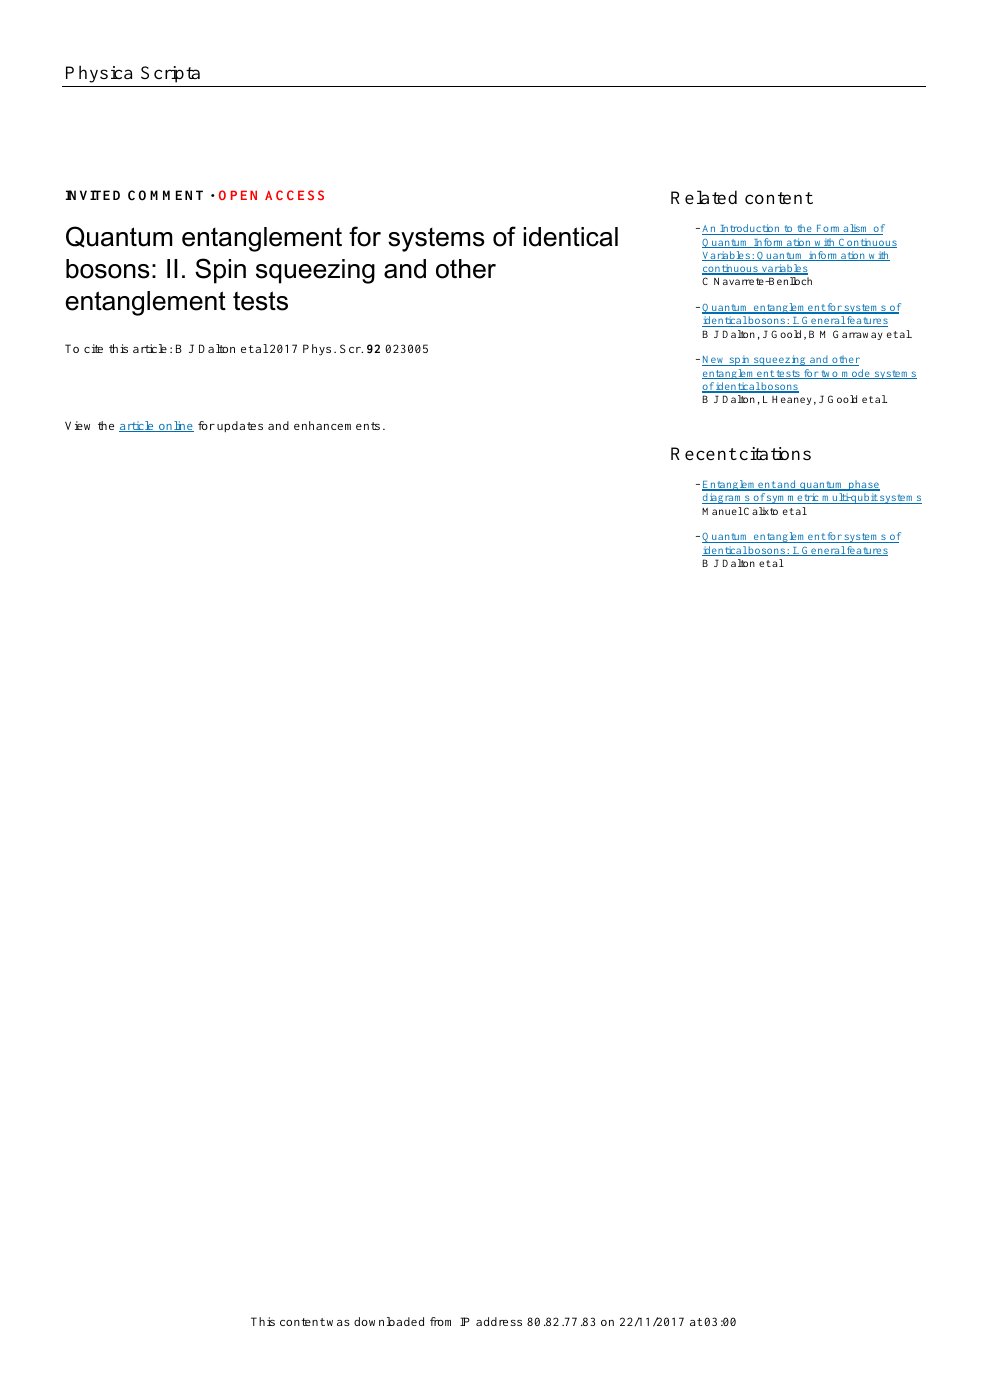 Quantum Entanglement For Systems Of Identical Bosons Ii Spin Squeezing And Other Entanglement Tests Topic Of Research Paper In Physical Sciences Download Scholarly Article Pdf And Read For Free On Cyberleninka